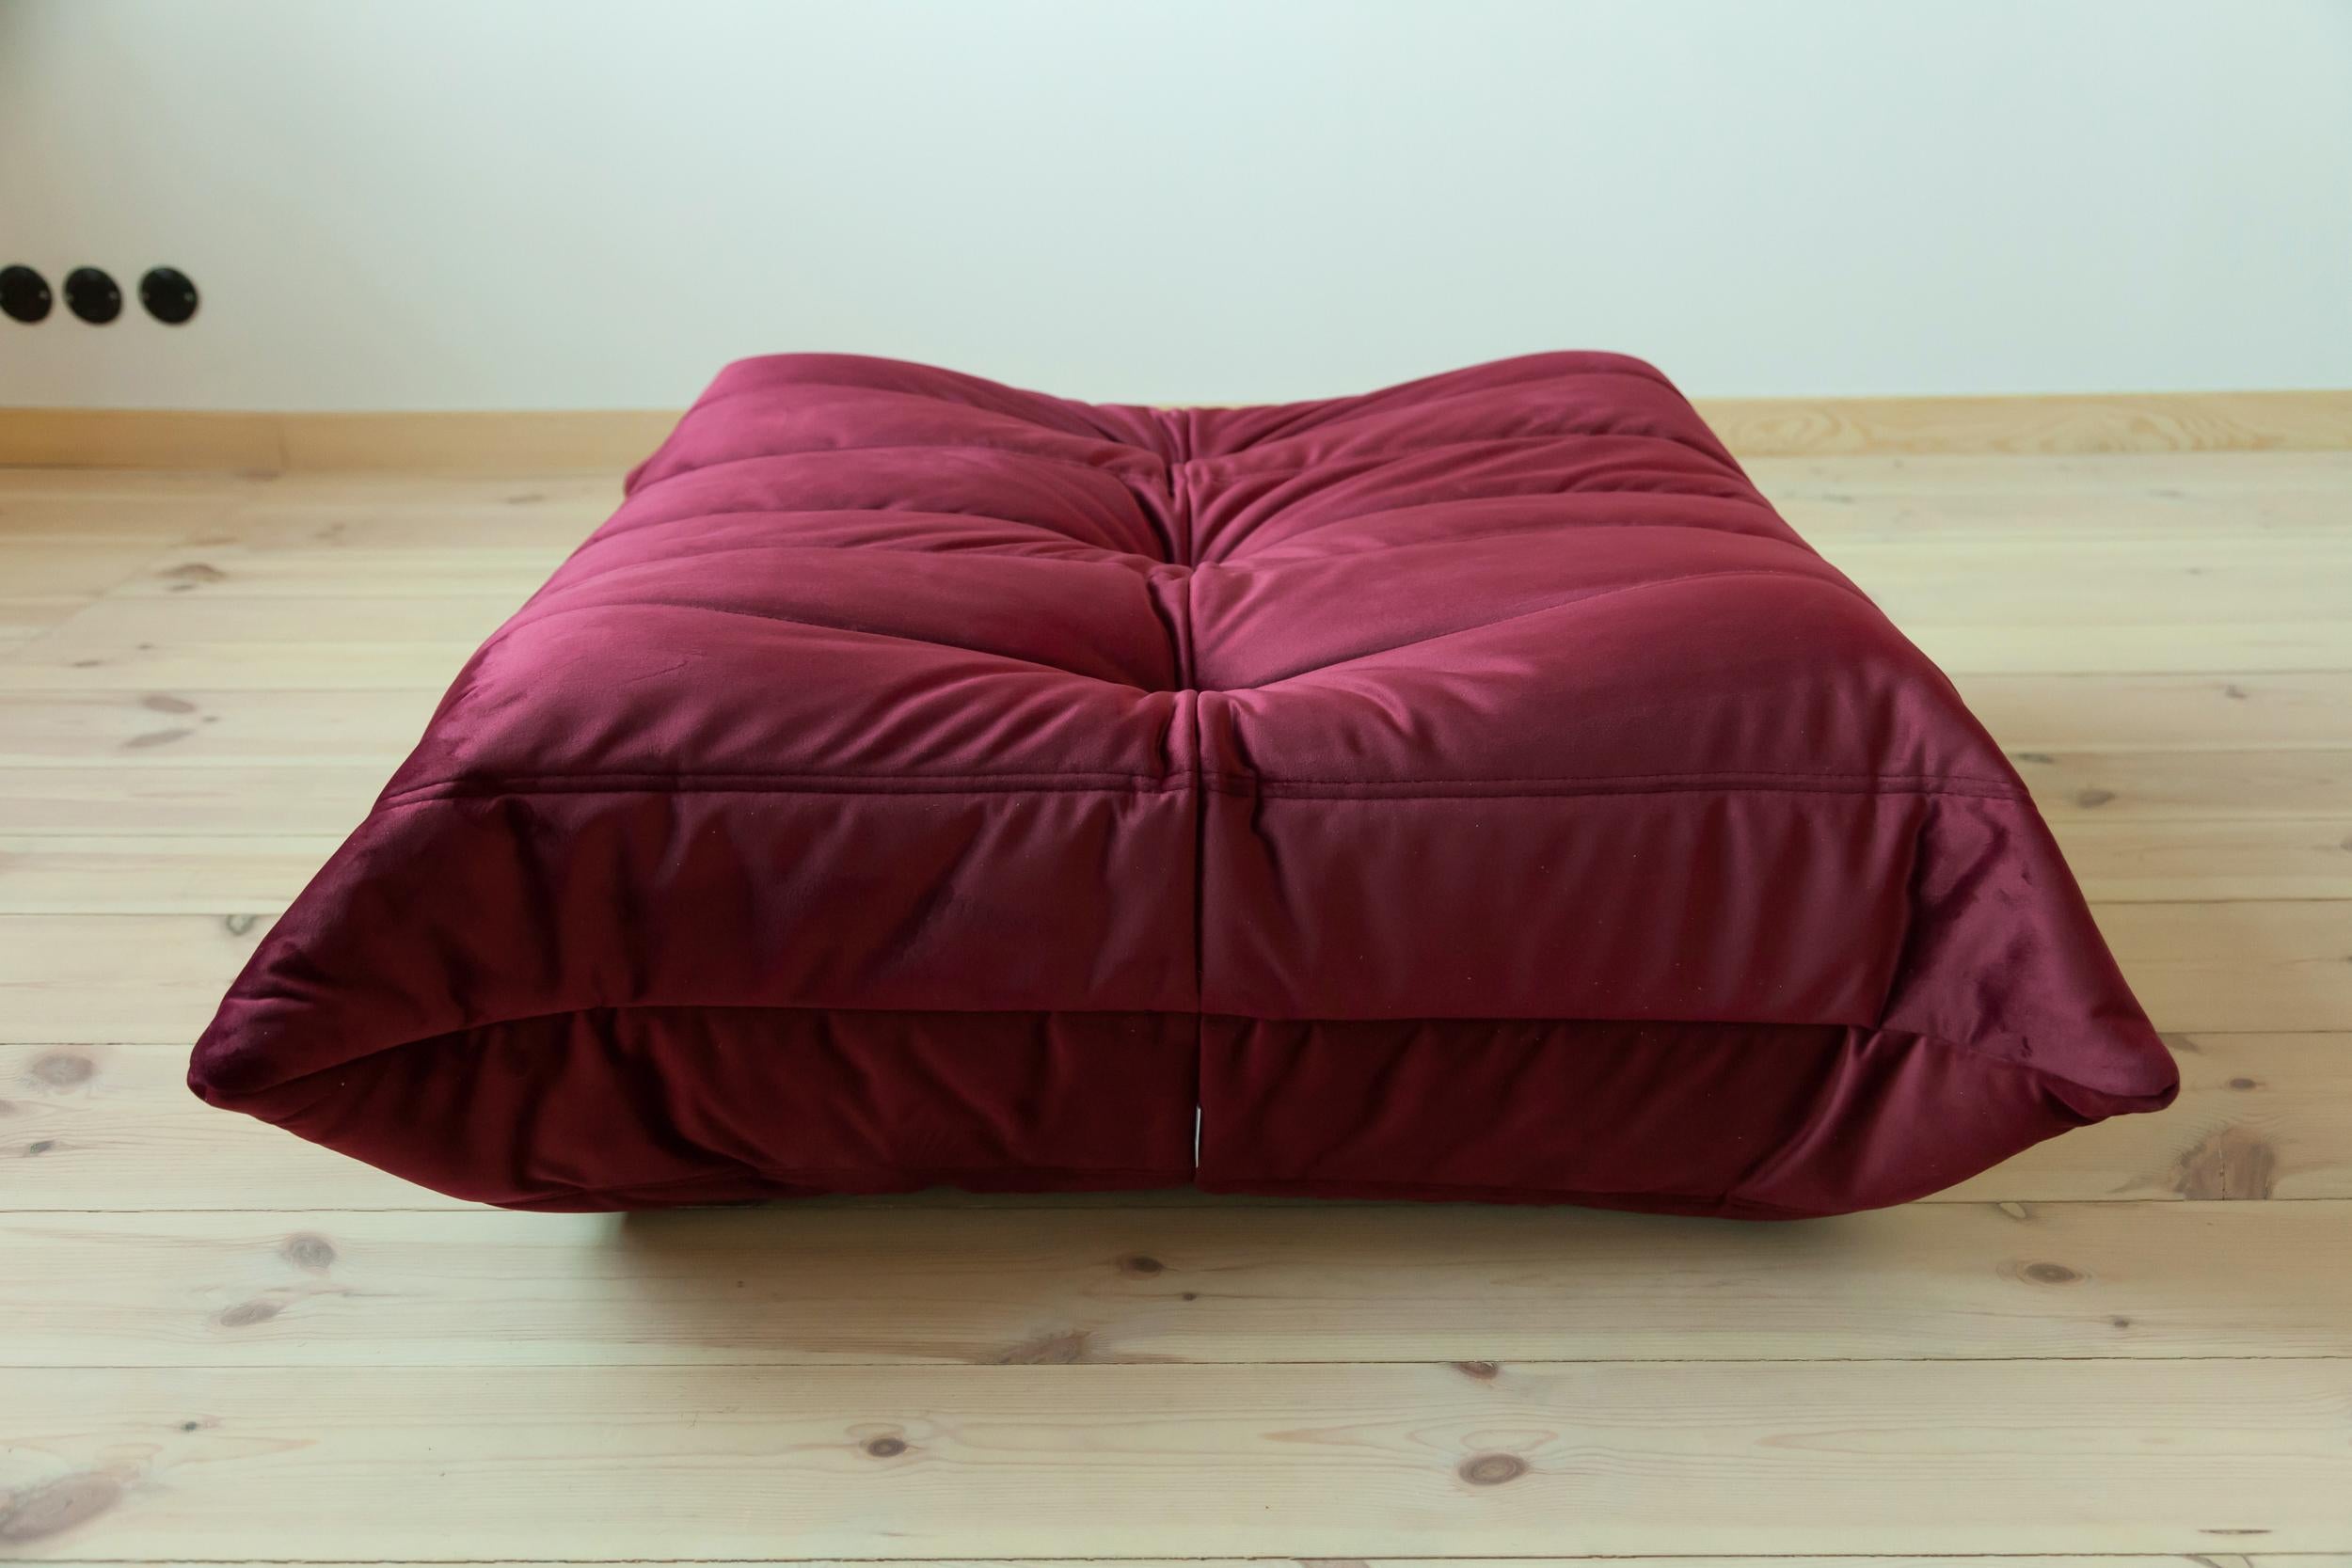 This Togo ottoman was designed by Michel Ducaroy in 1973 and was manufactured by Ligne Roset in France. It has been reupholstered in new burgundy velvet (87 x 80 x 34 cm). It has the original Ligne Roset logo and genuine Ligne Roset bottom.